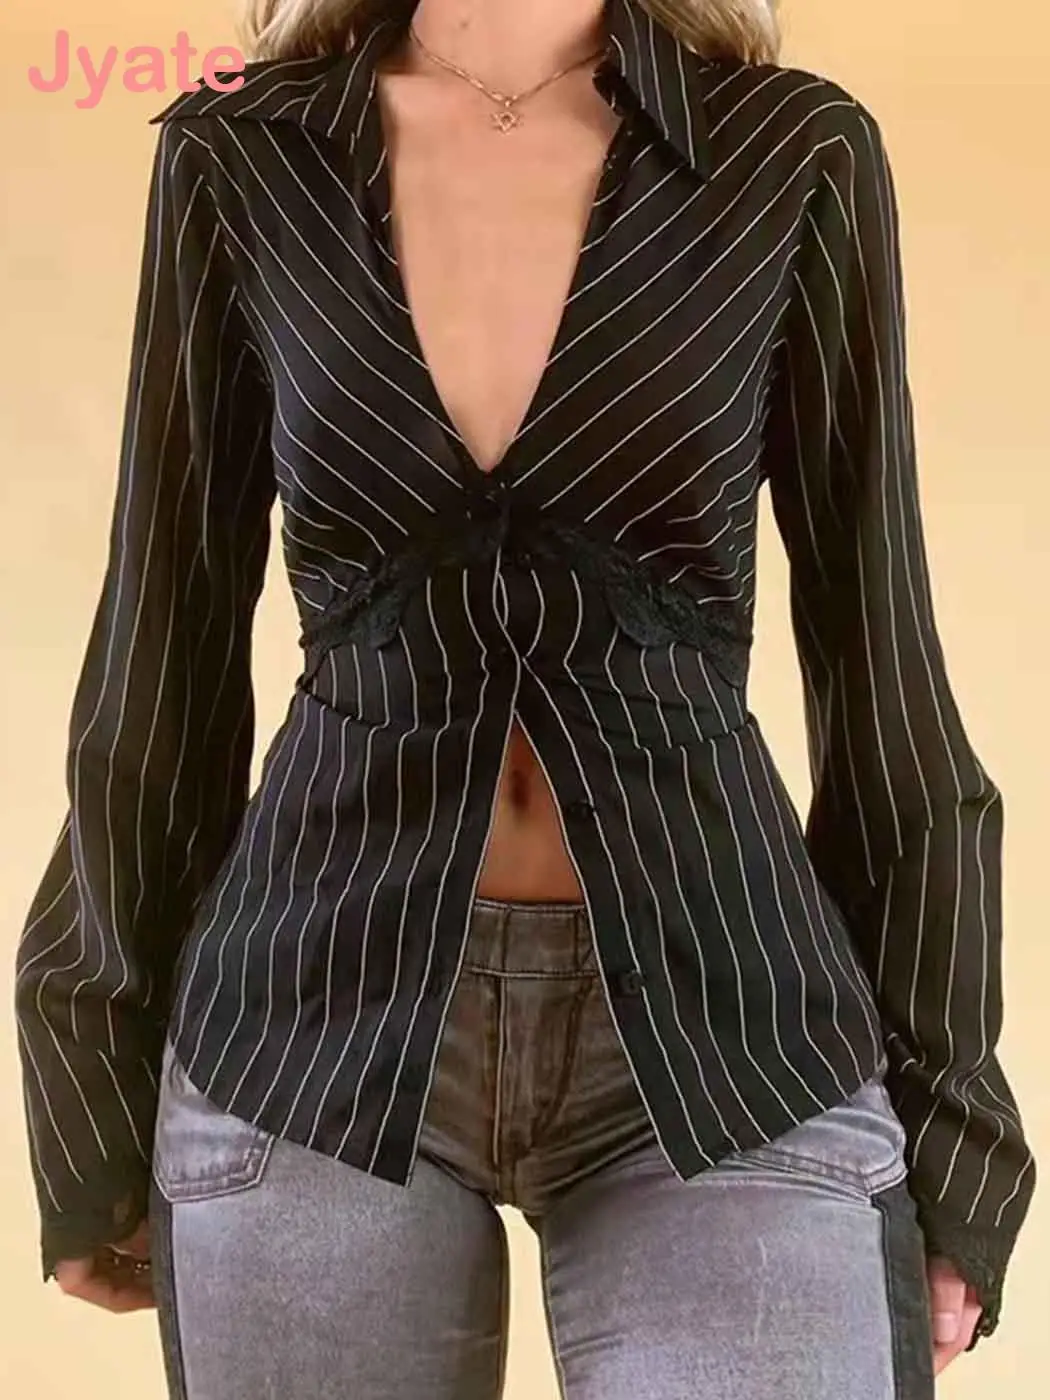 Jyate Vintage Stripe Flared Sleeve Cardigan Shirts Women Lace Deep V Neck Elegant Fashion Single Button Blouses And Tops Y2K